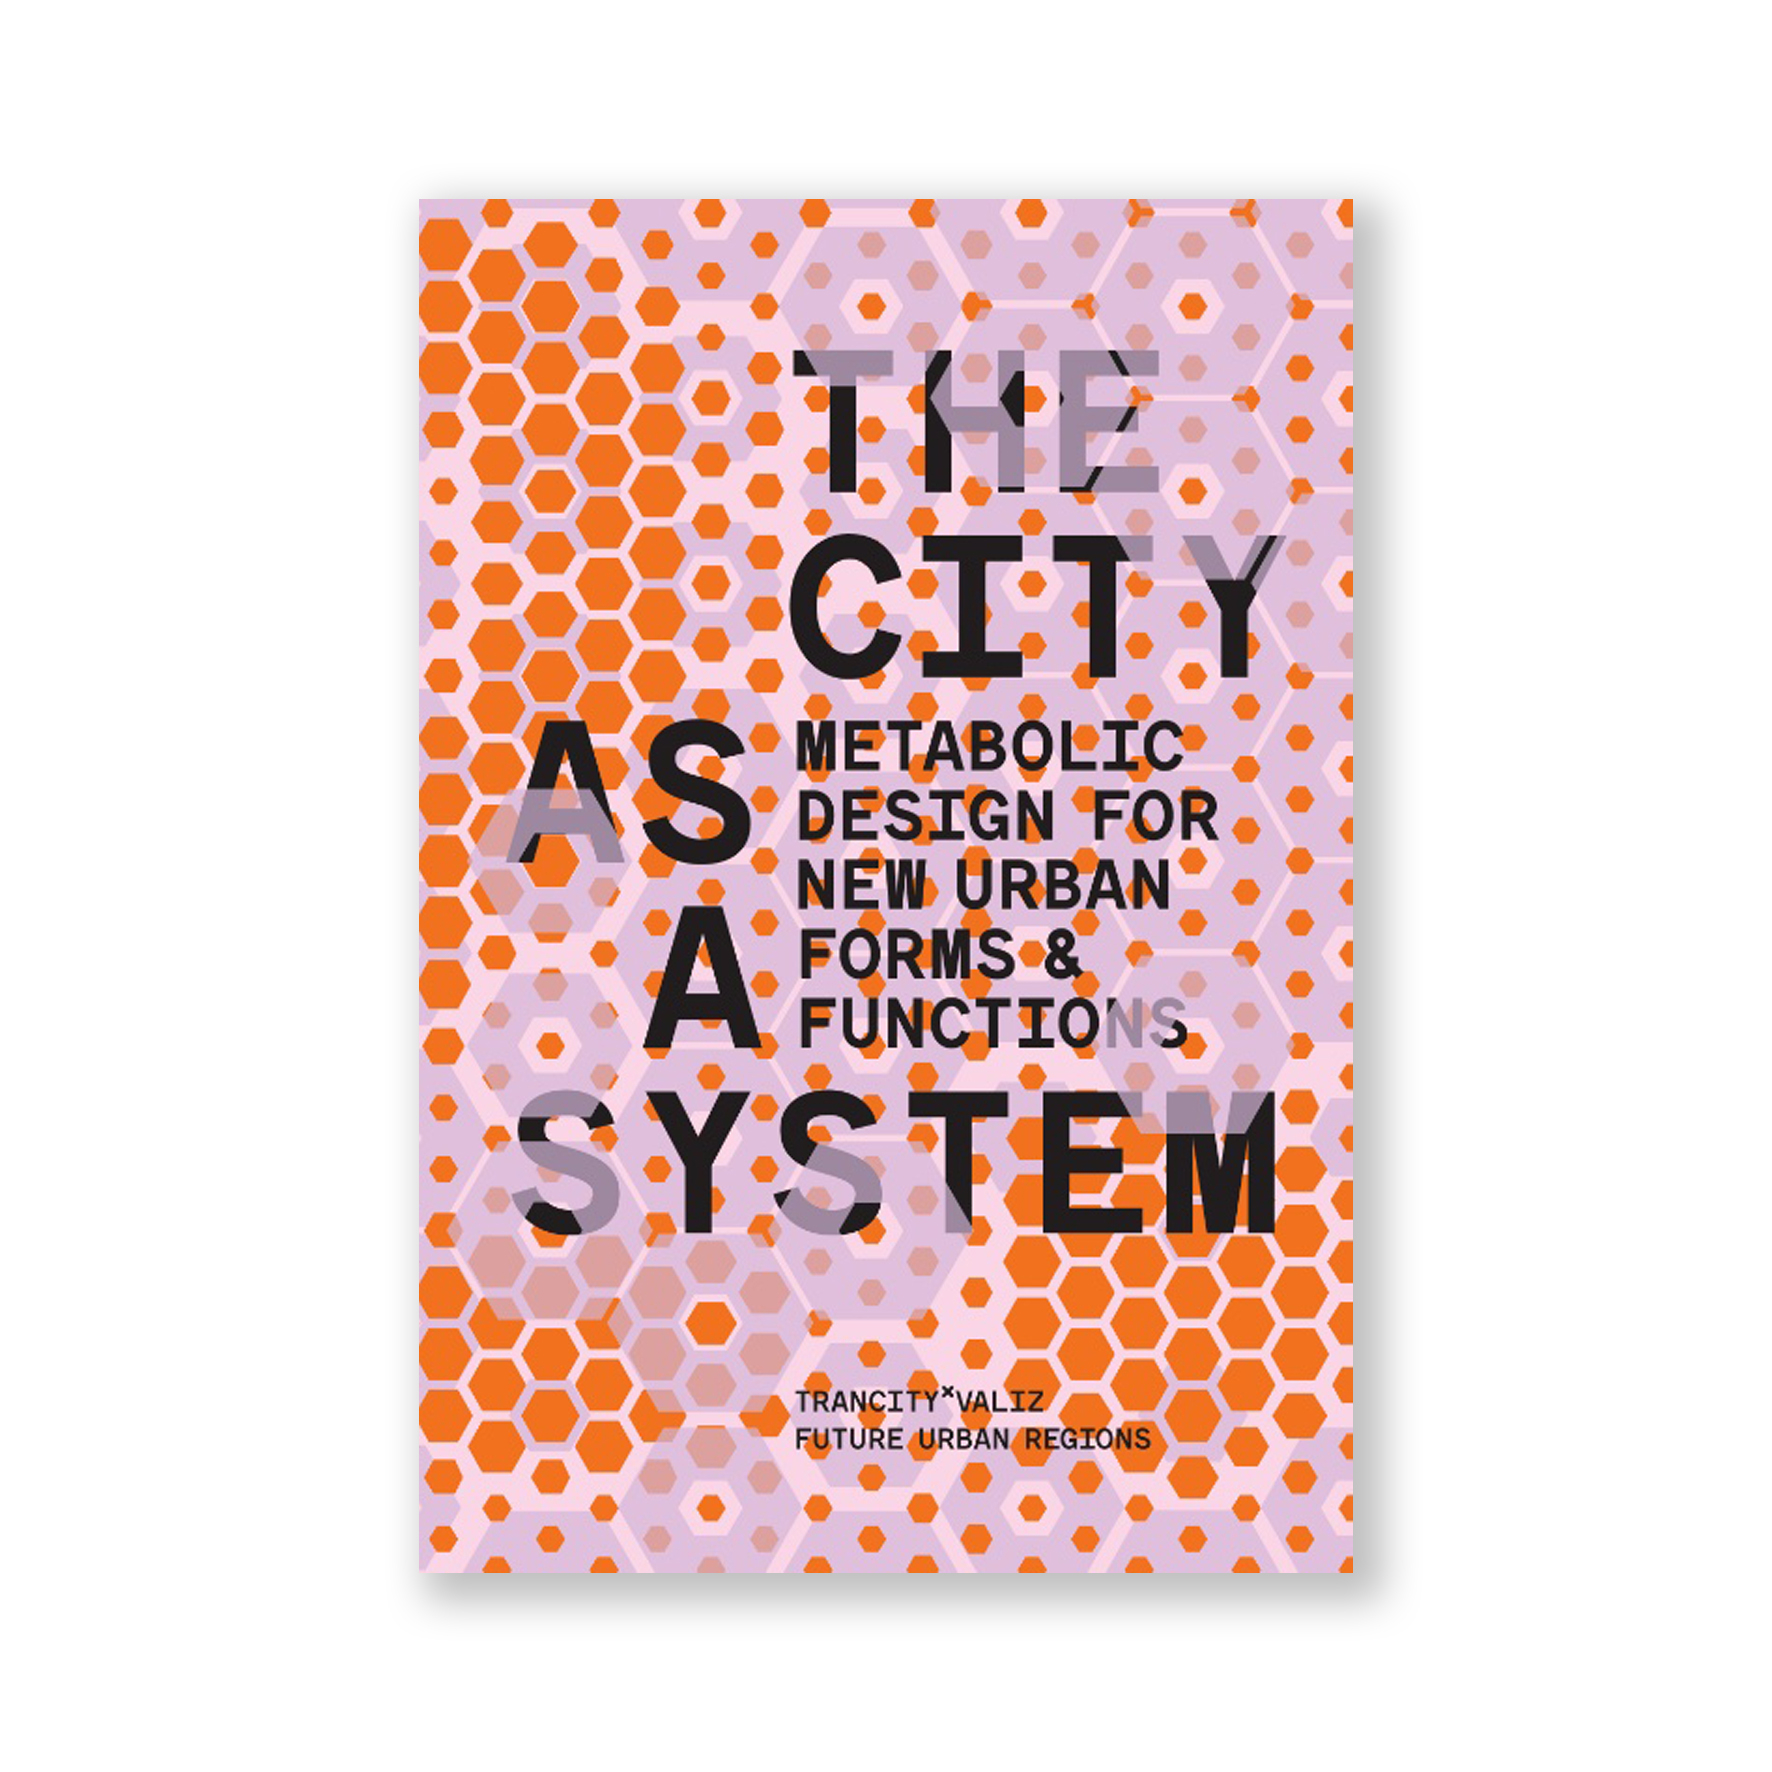 The City as a System – Metabolic Design for New Urban Forms and Functions